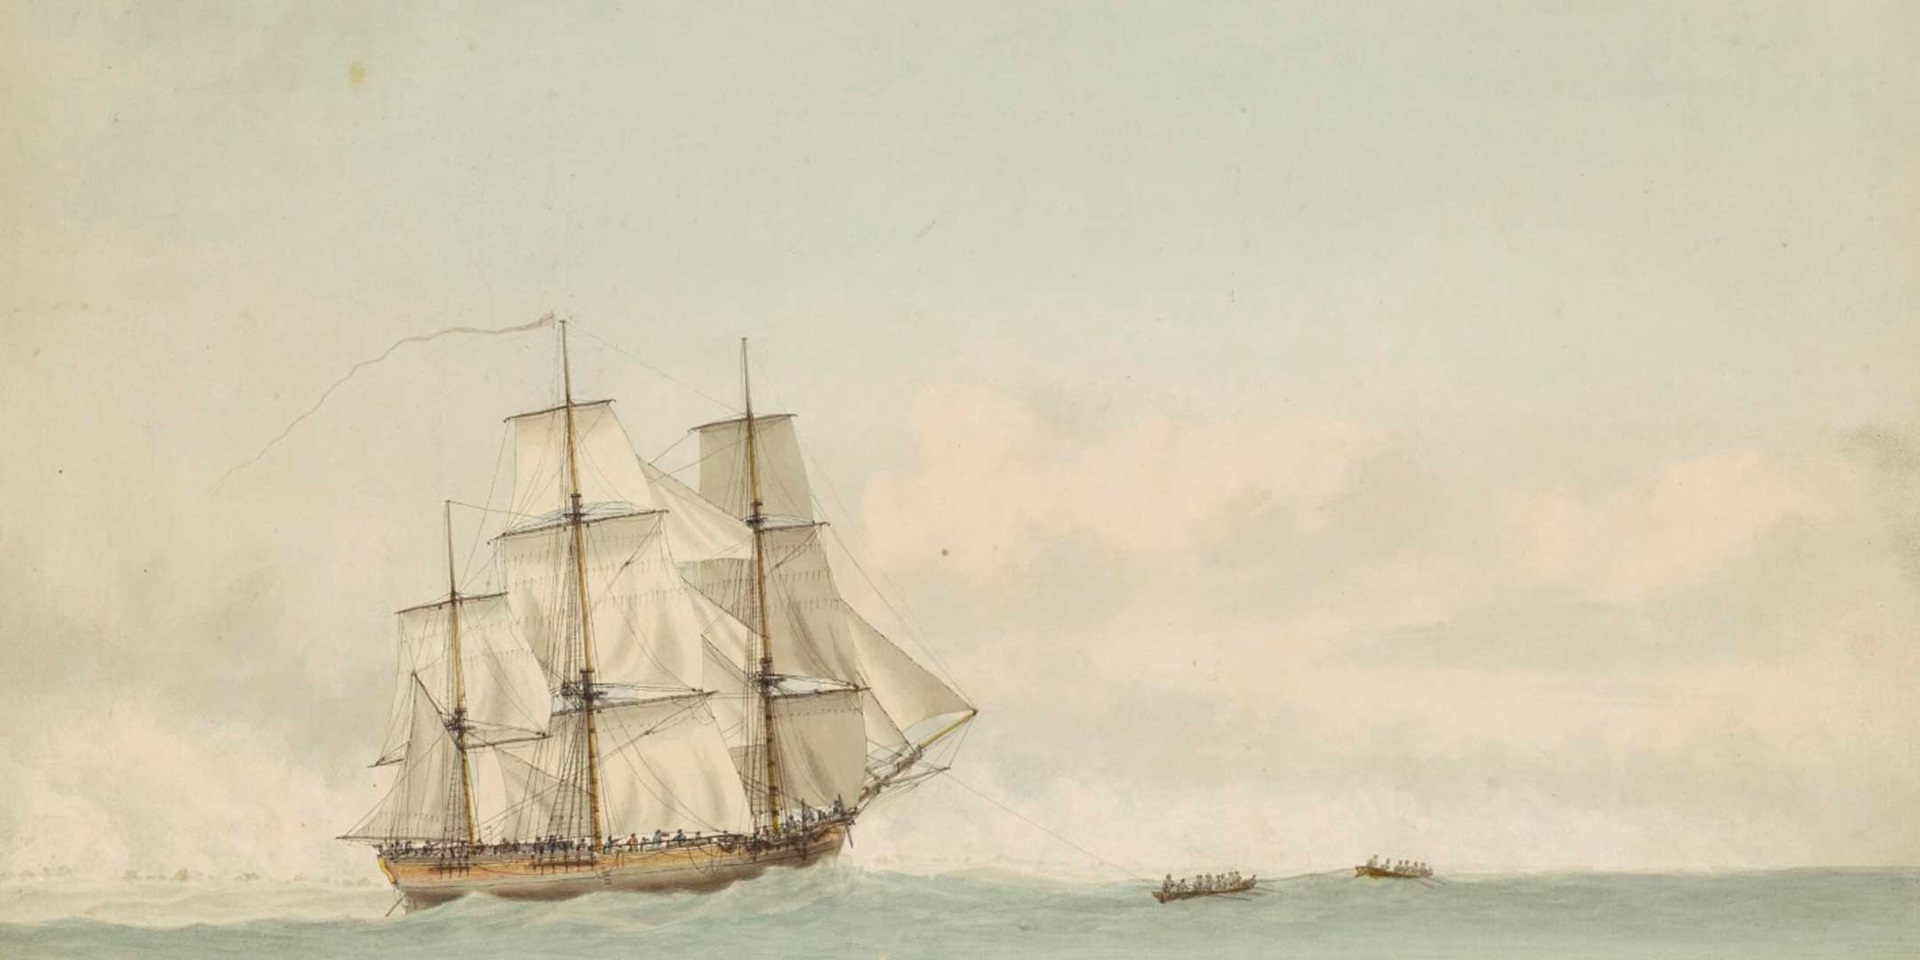 HMS Endeavour off the coast of New Holland, by Samuel Atkins c1794